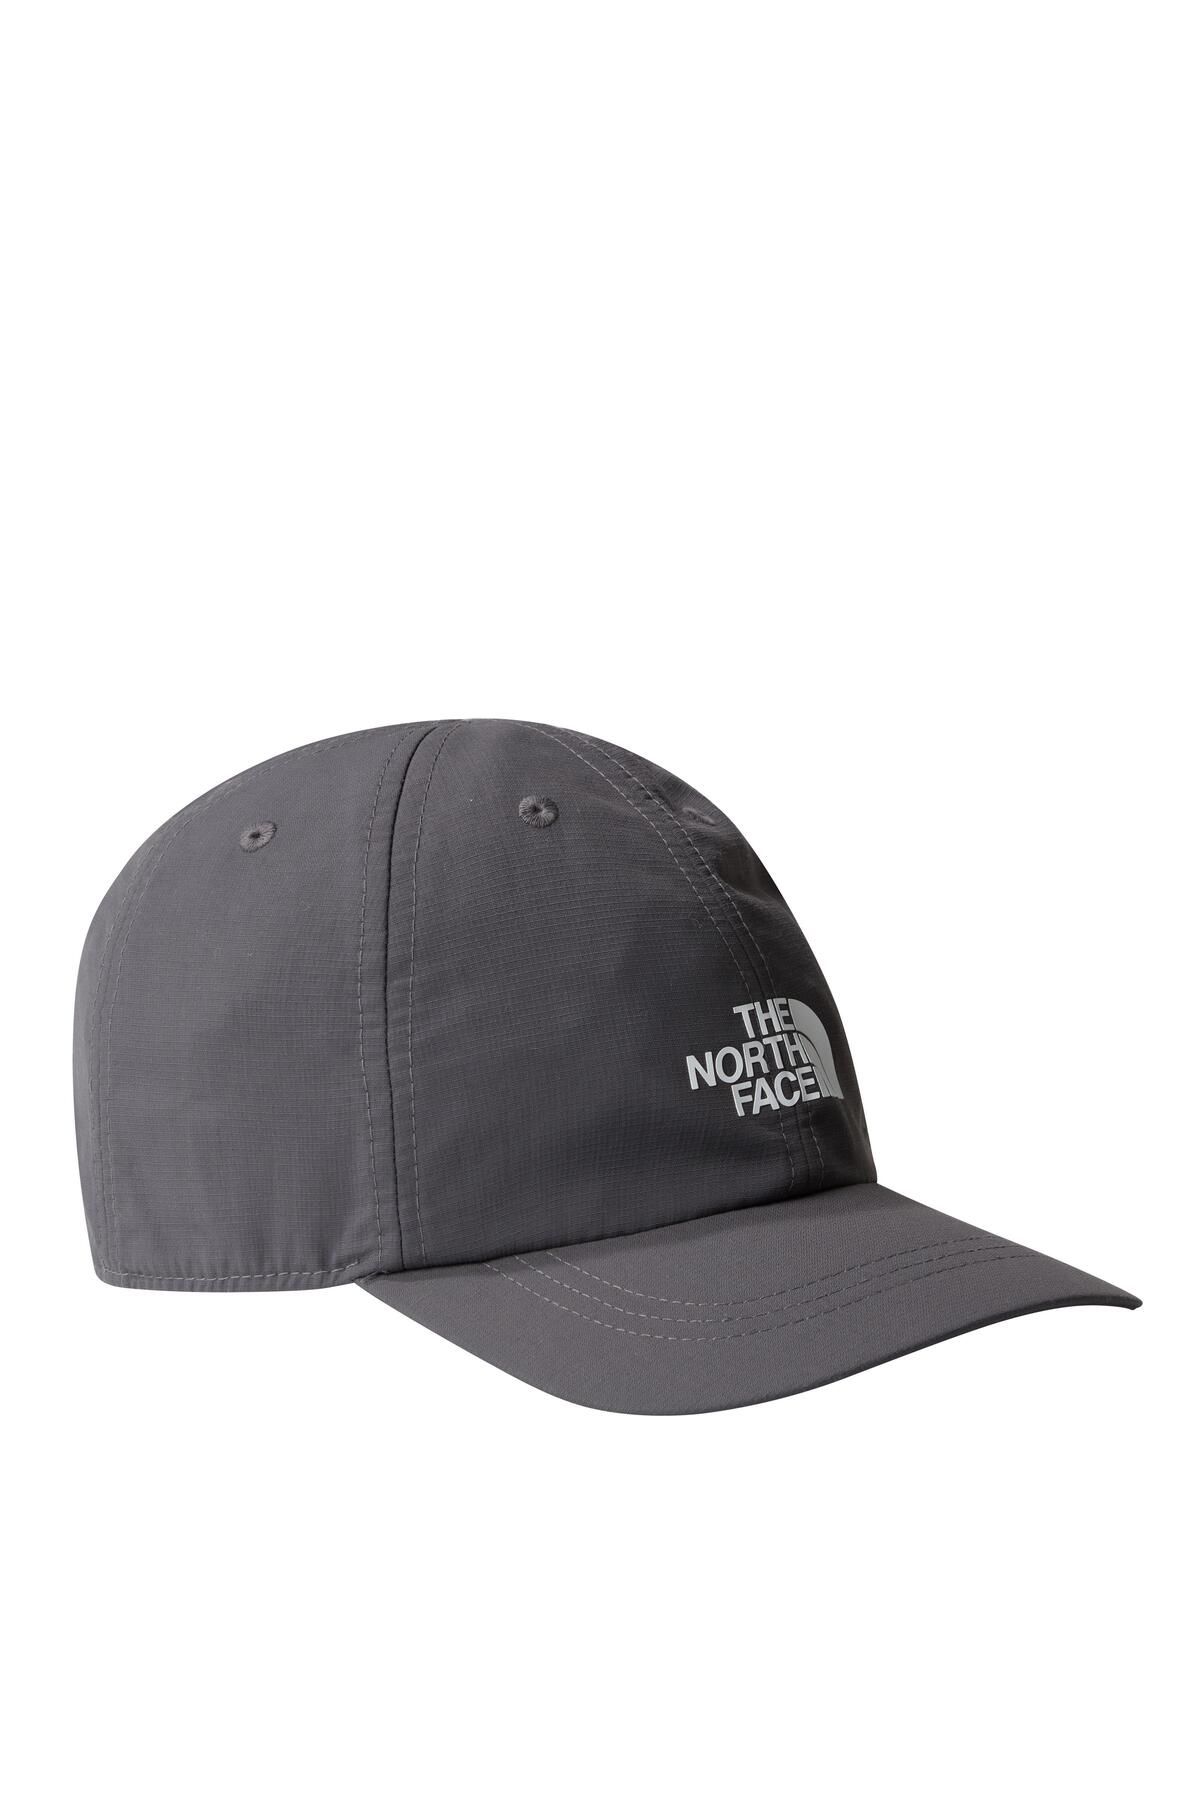 The North Face HORIZON HAT NF0A5FXLRHI1